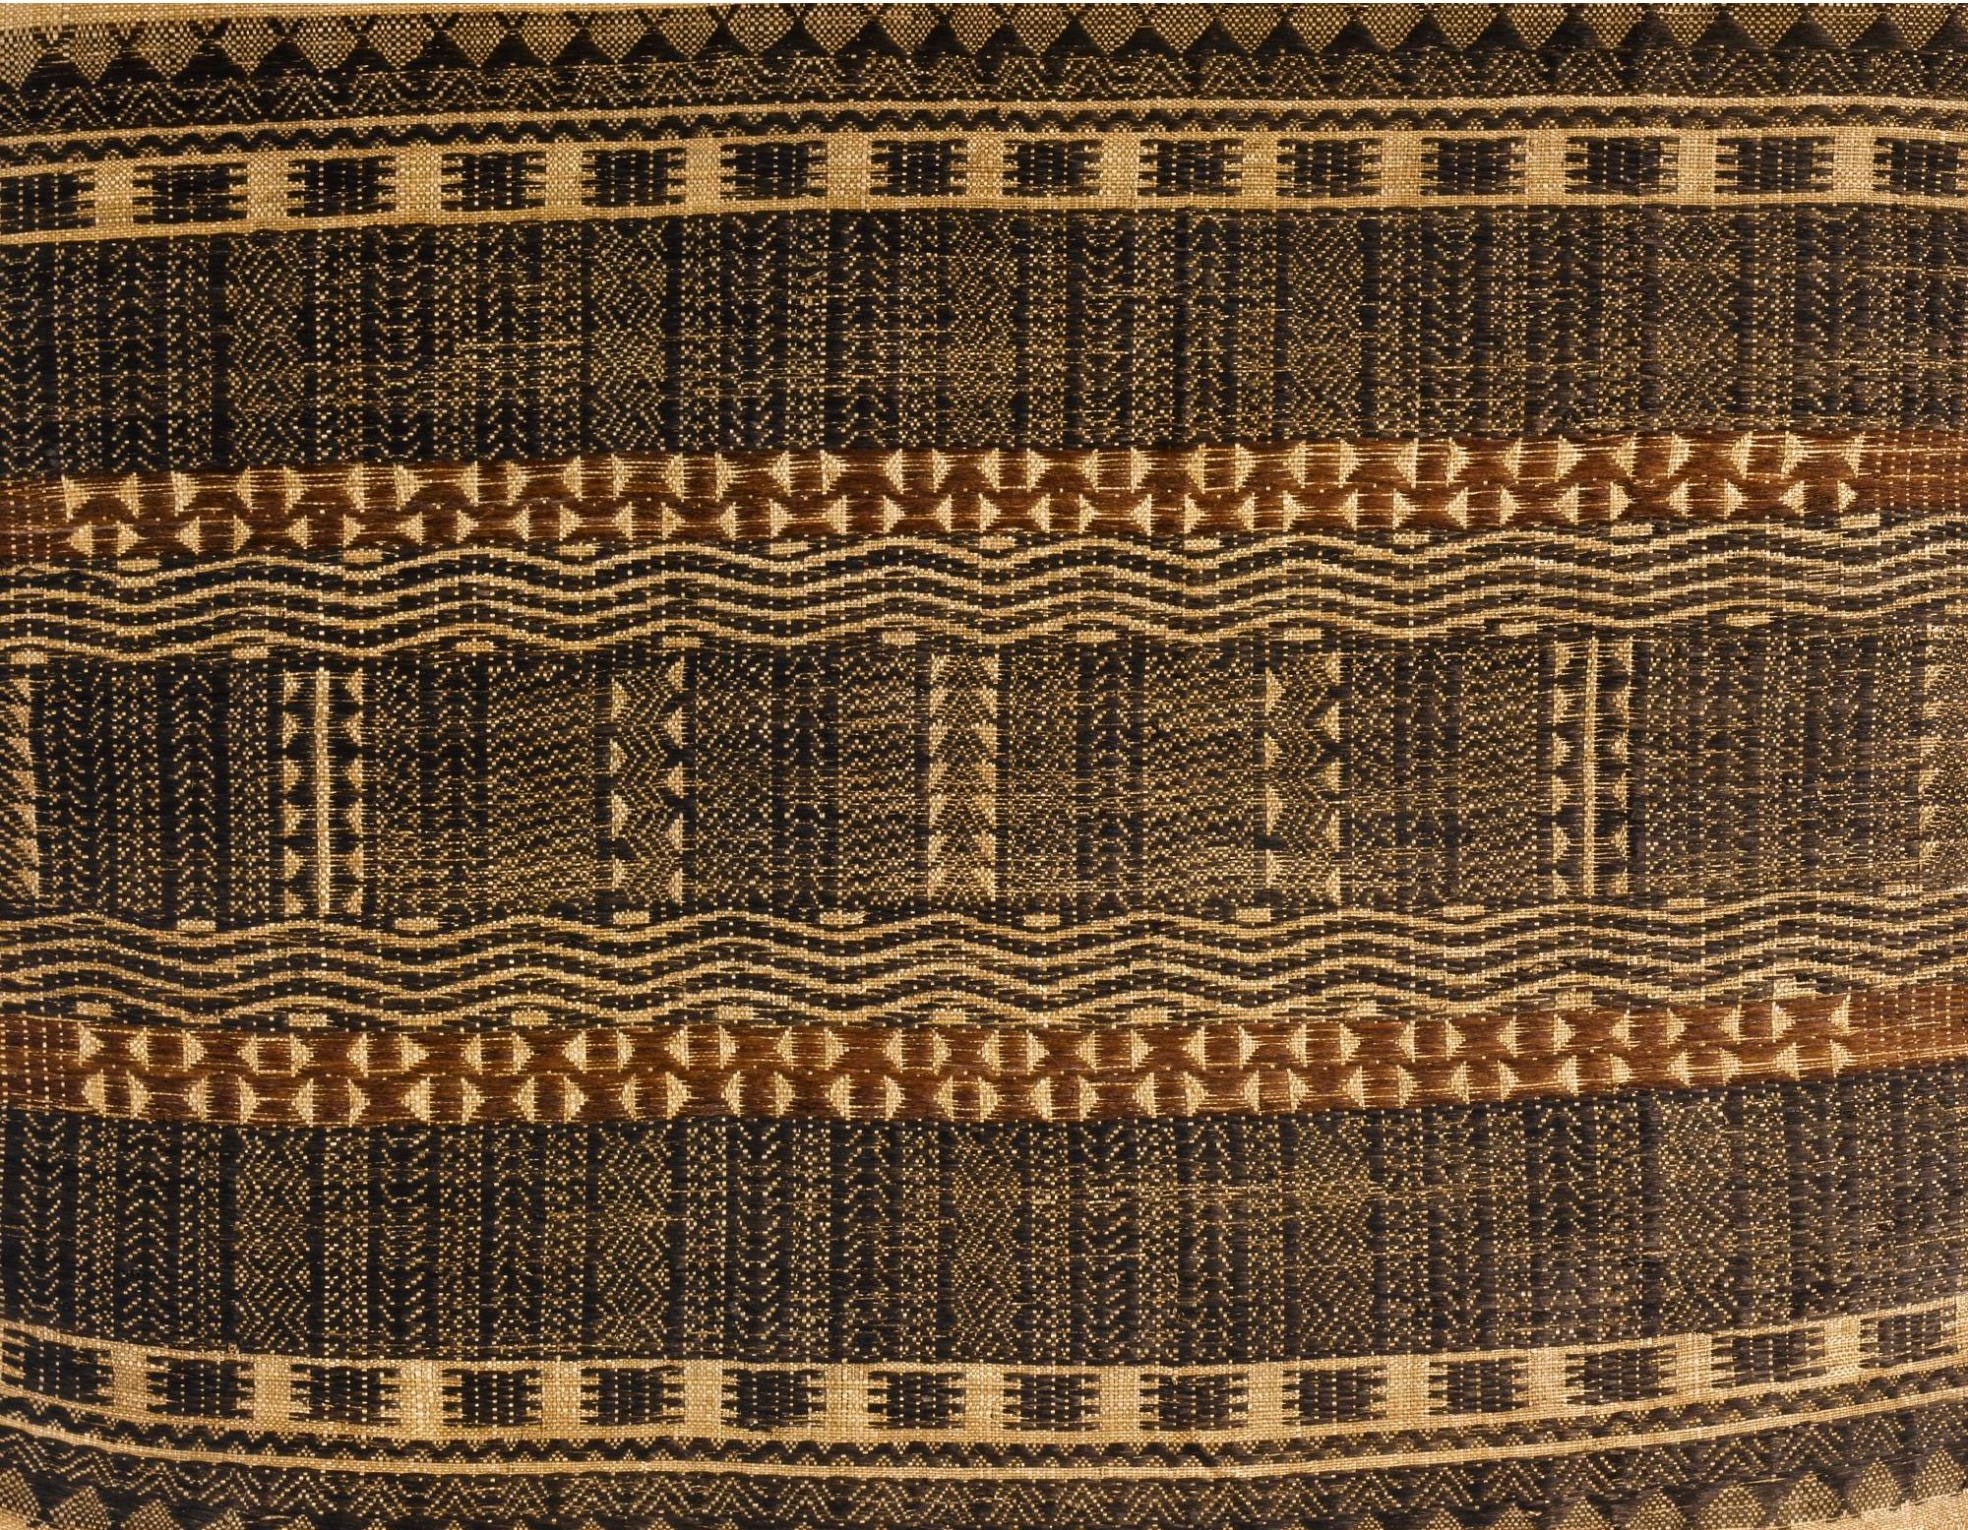 Textile from the Caroline Islands